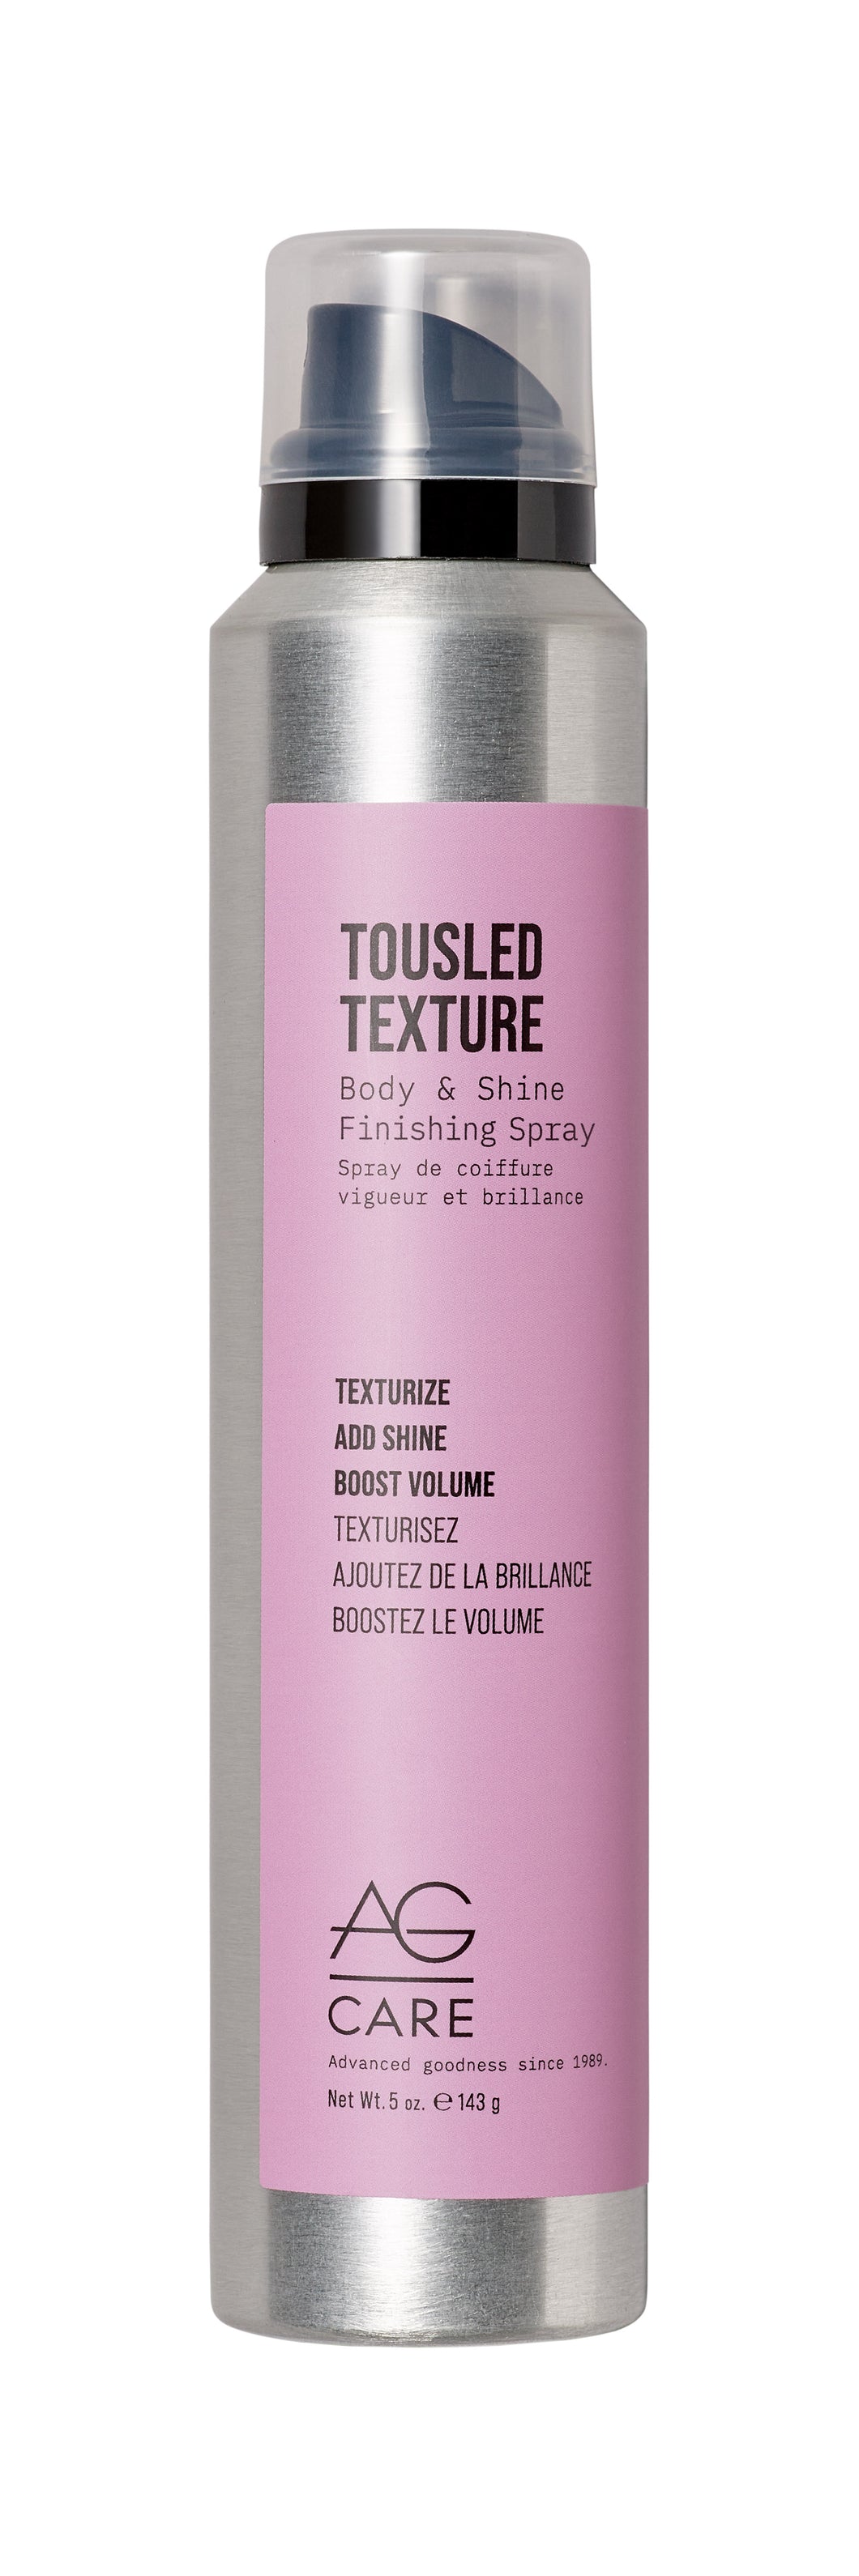 AG Tousled Texture Body & Shine Styling Spray